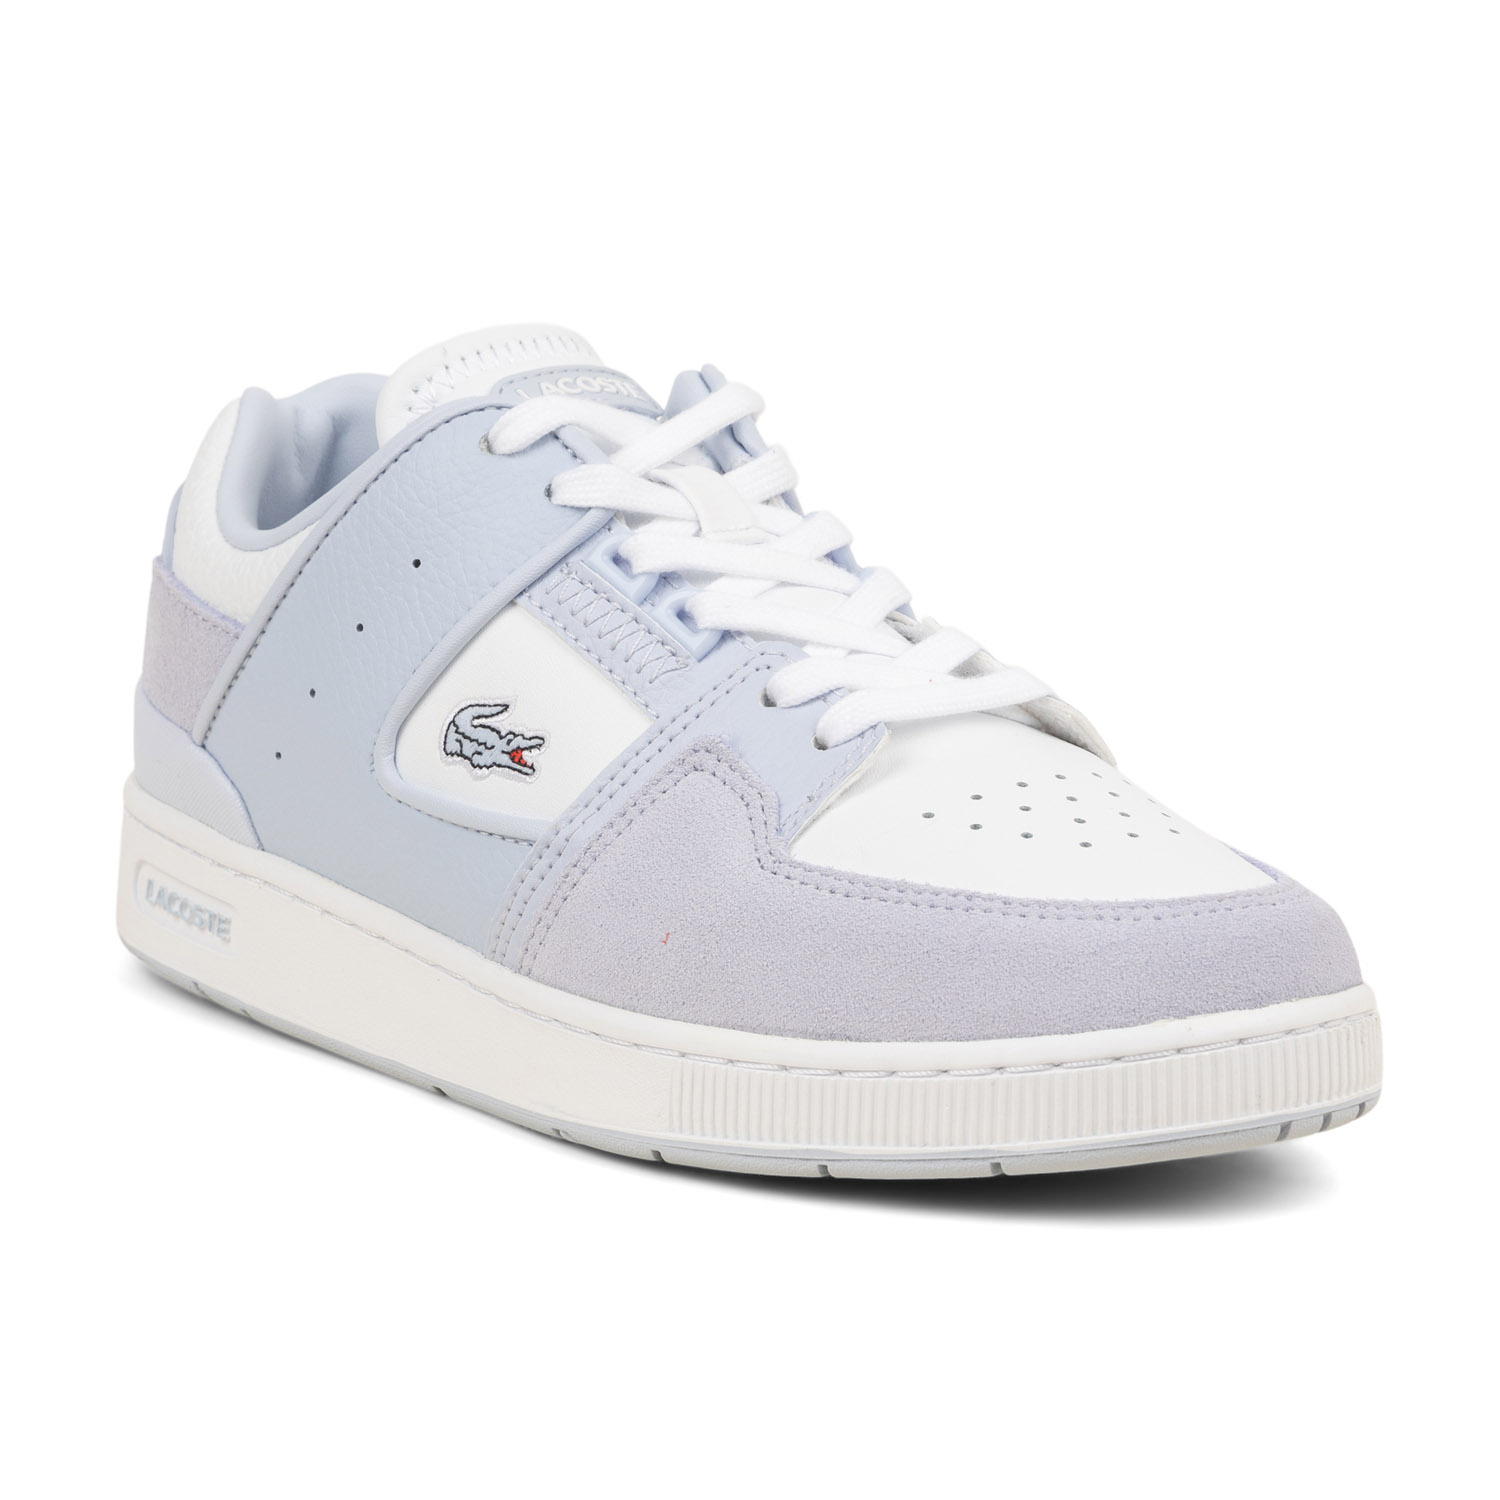 02 - COURT CAGE - LACOSTE -  - Cuir